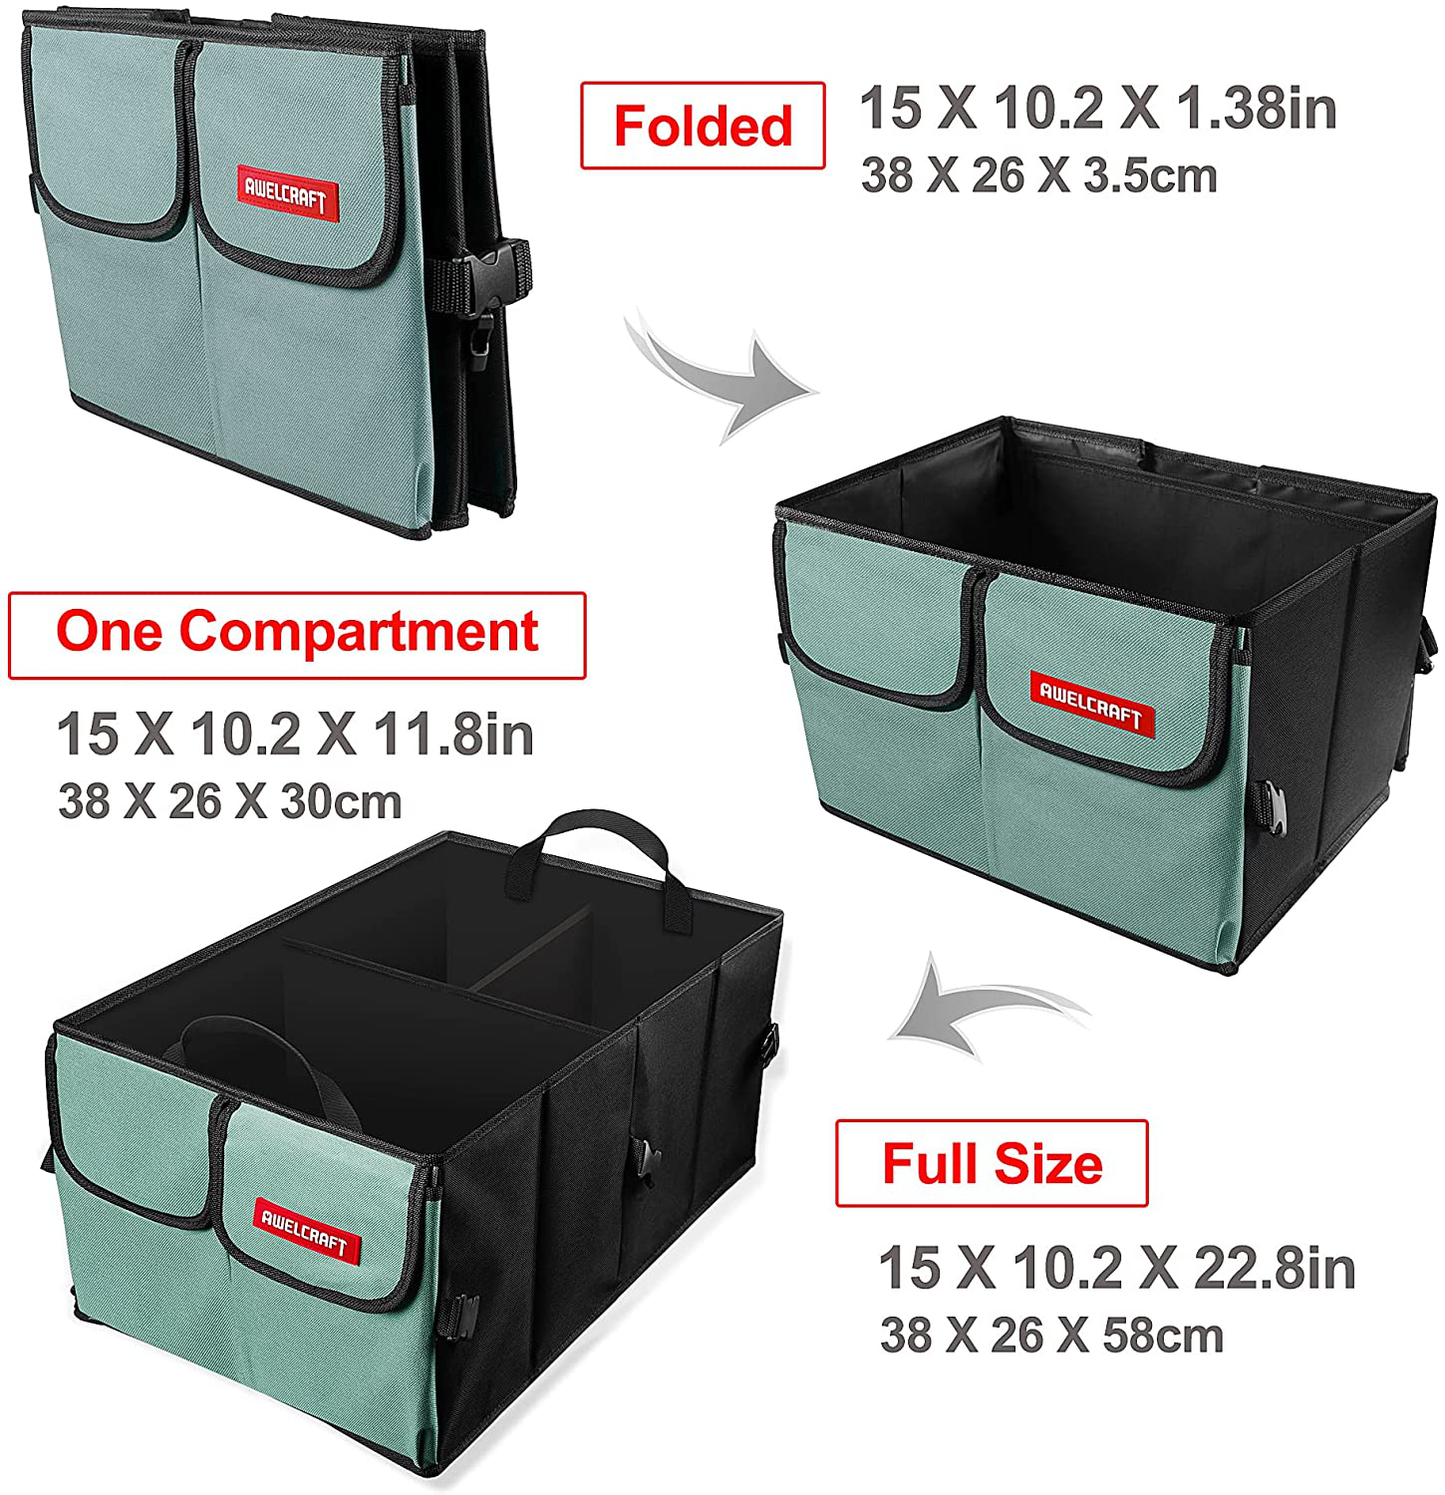 Multi-Compartment Large Trunk Organizer and Storage - Collapsible Multi-Compartment Car Organizer 